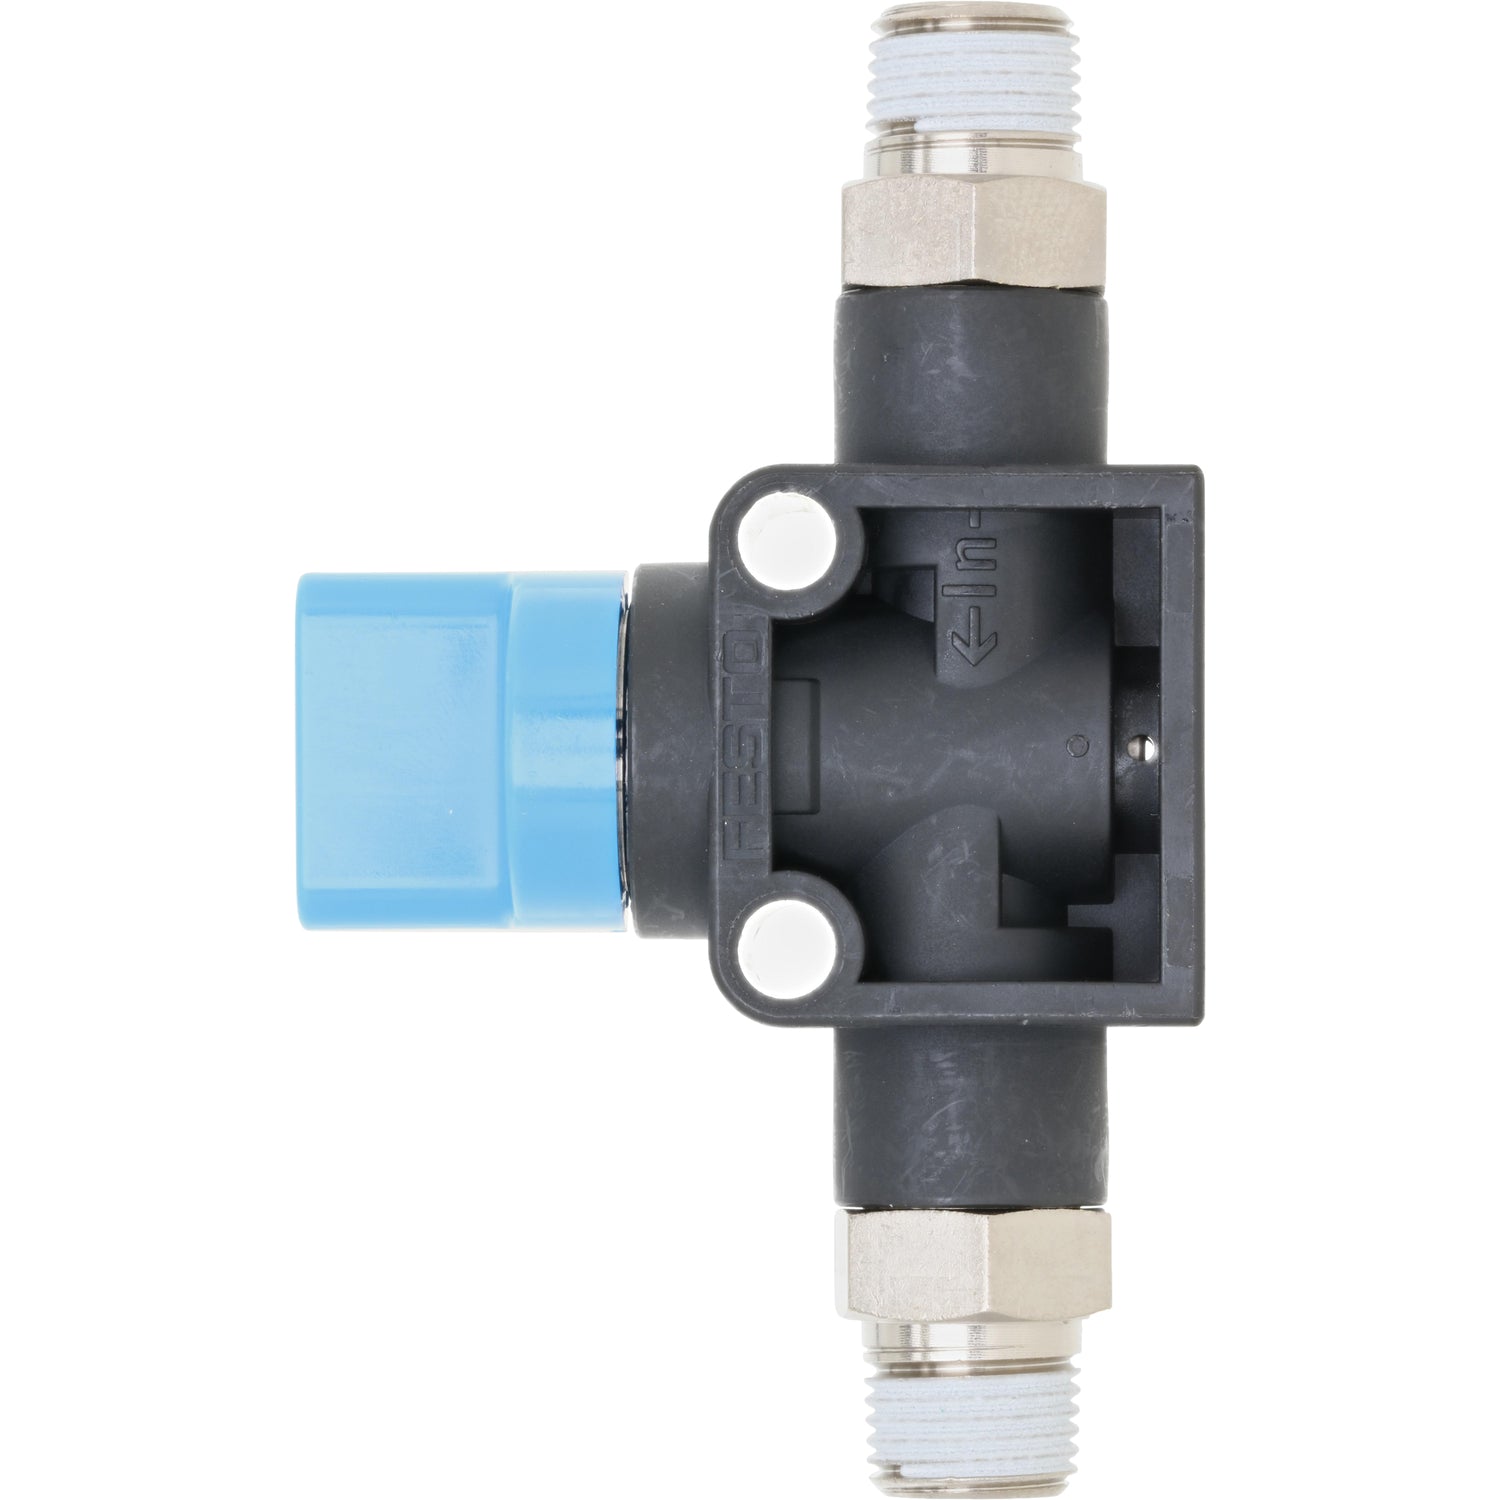 black plastic shut off valve with blue switch and threaded ends. Part shown on white background. 